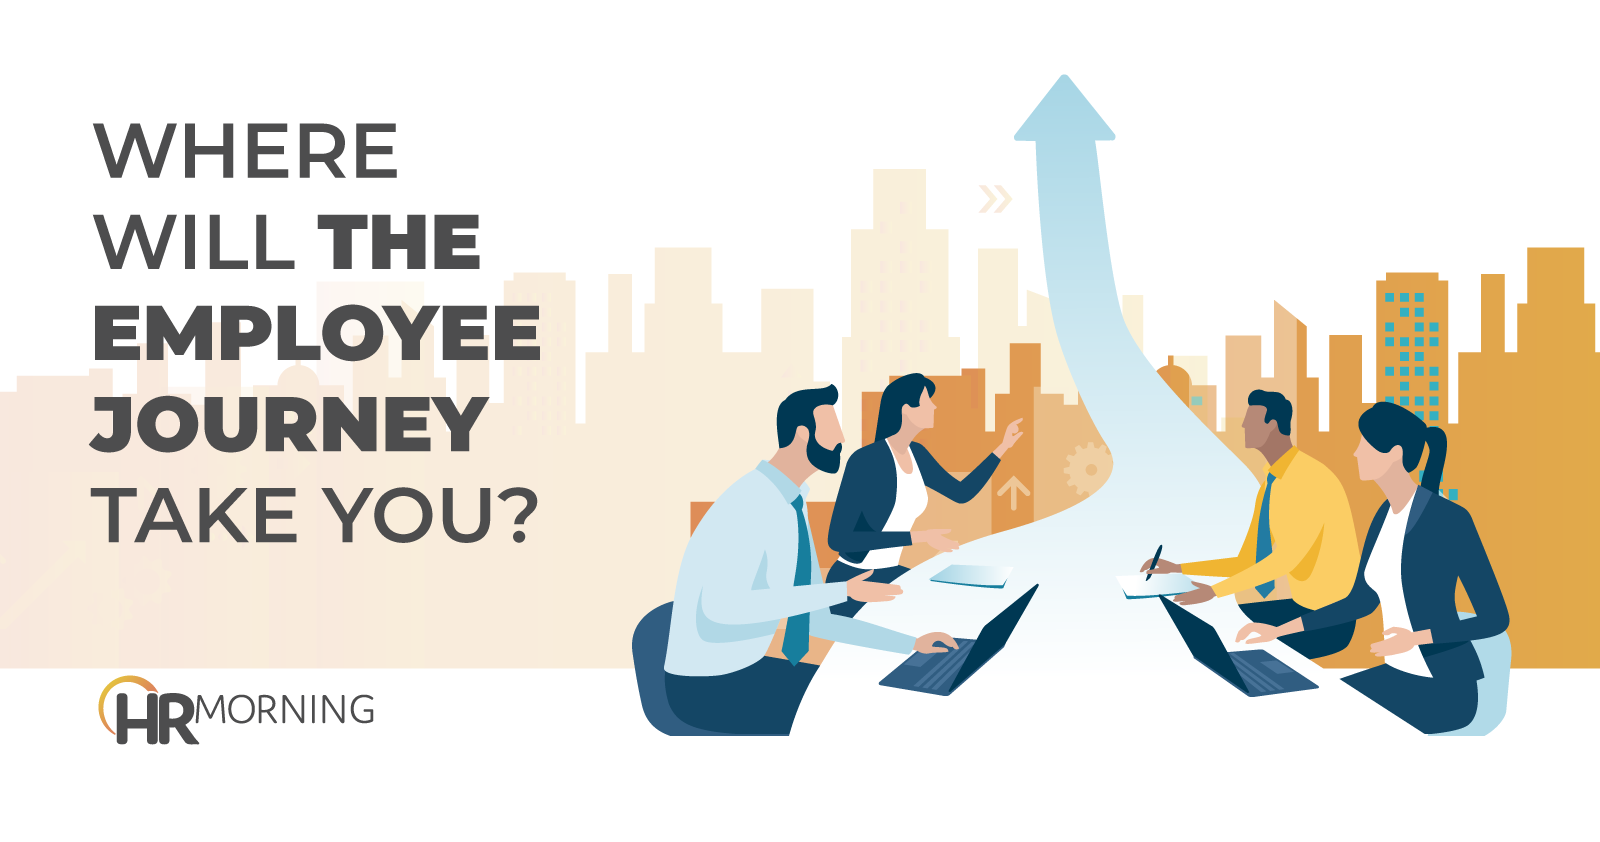 Where will the employee journey take you?